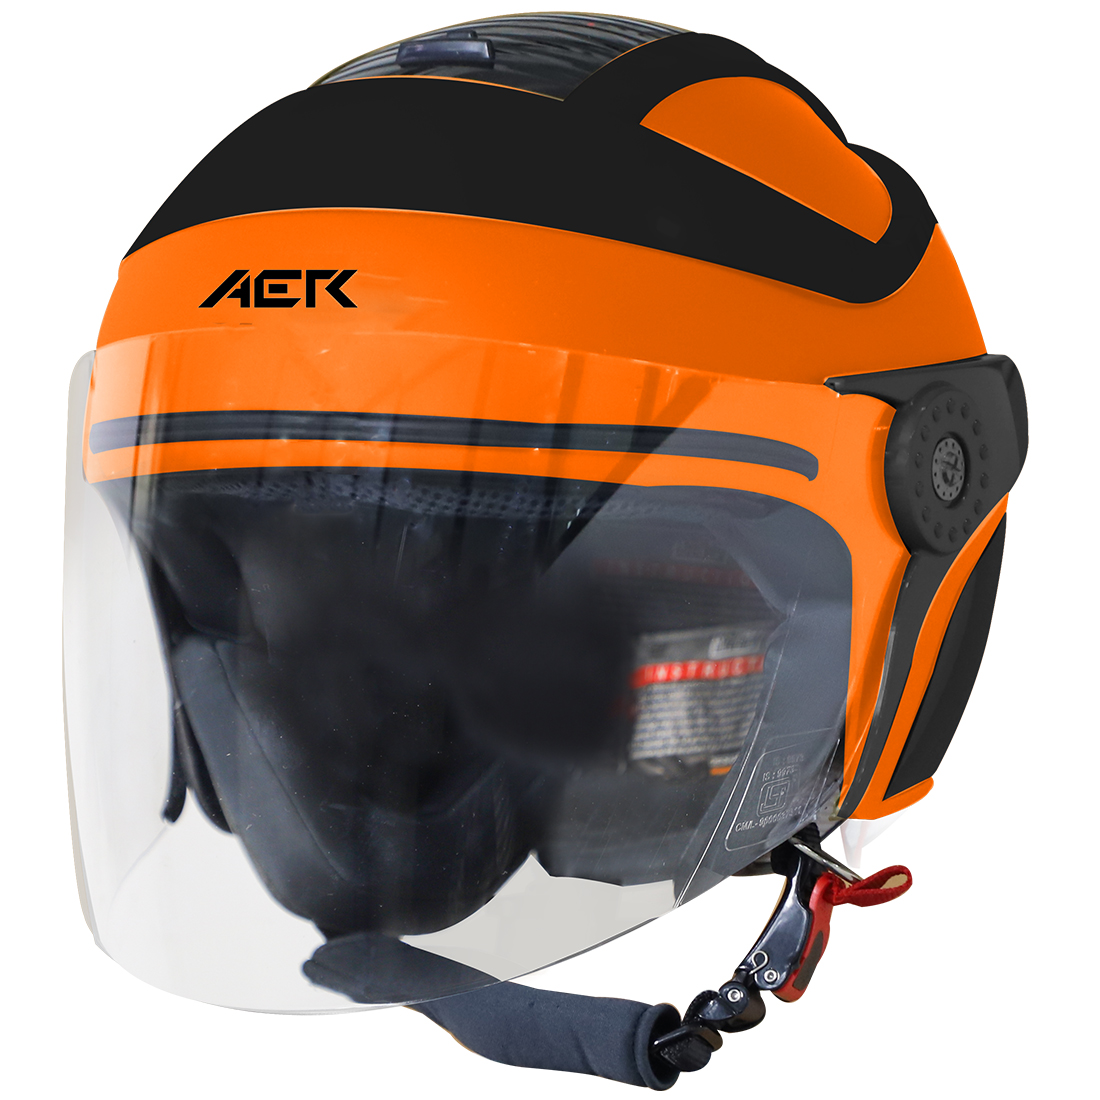 Steelbird SB-29 AER ISI Certified Open Face Helmet for Men and Women (Glossy Fluo Orange with Clear Visor)